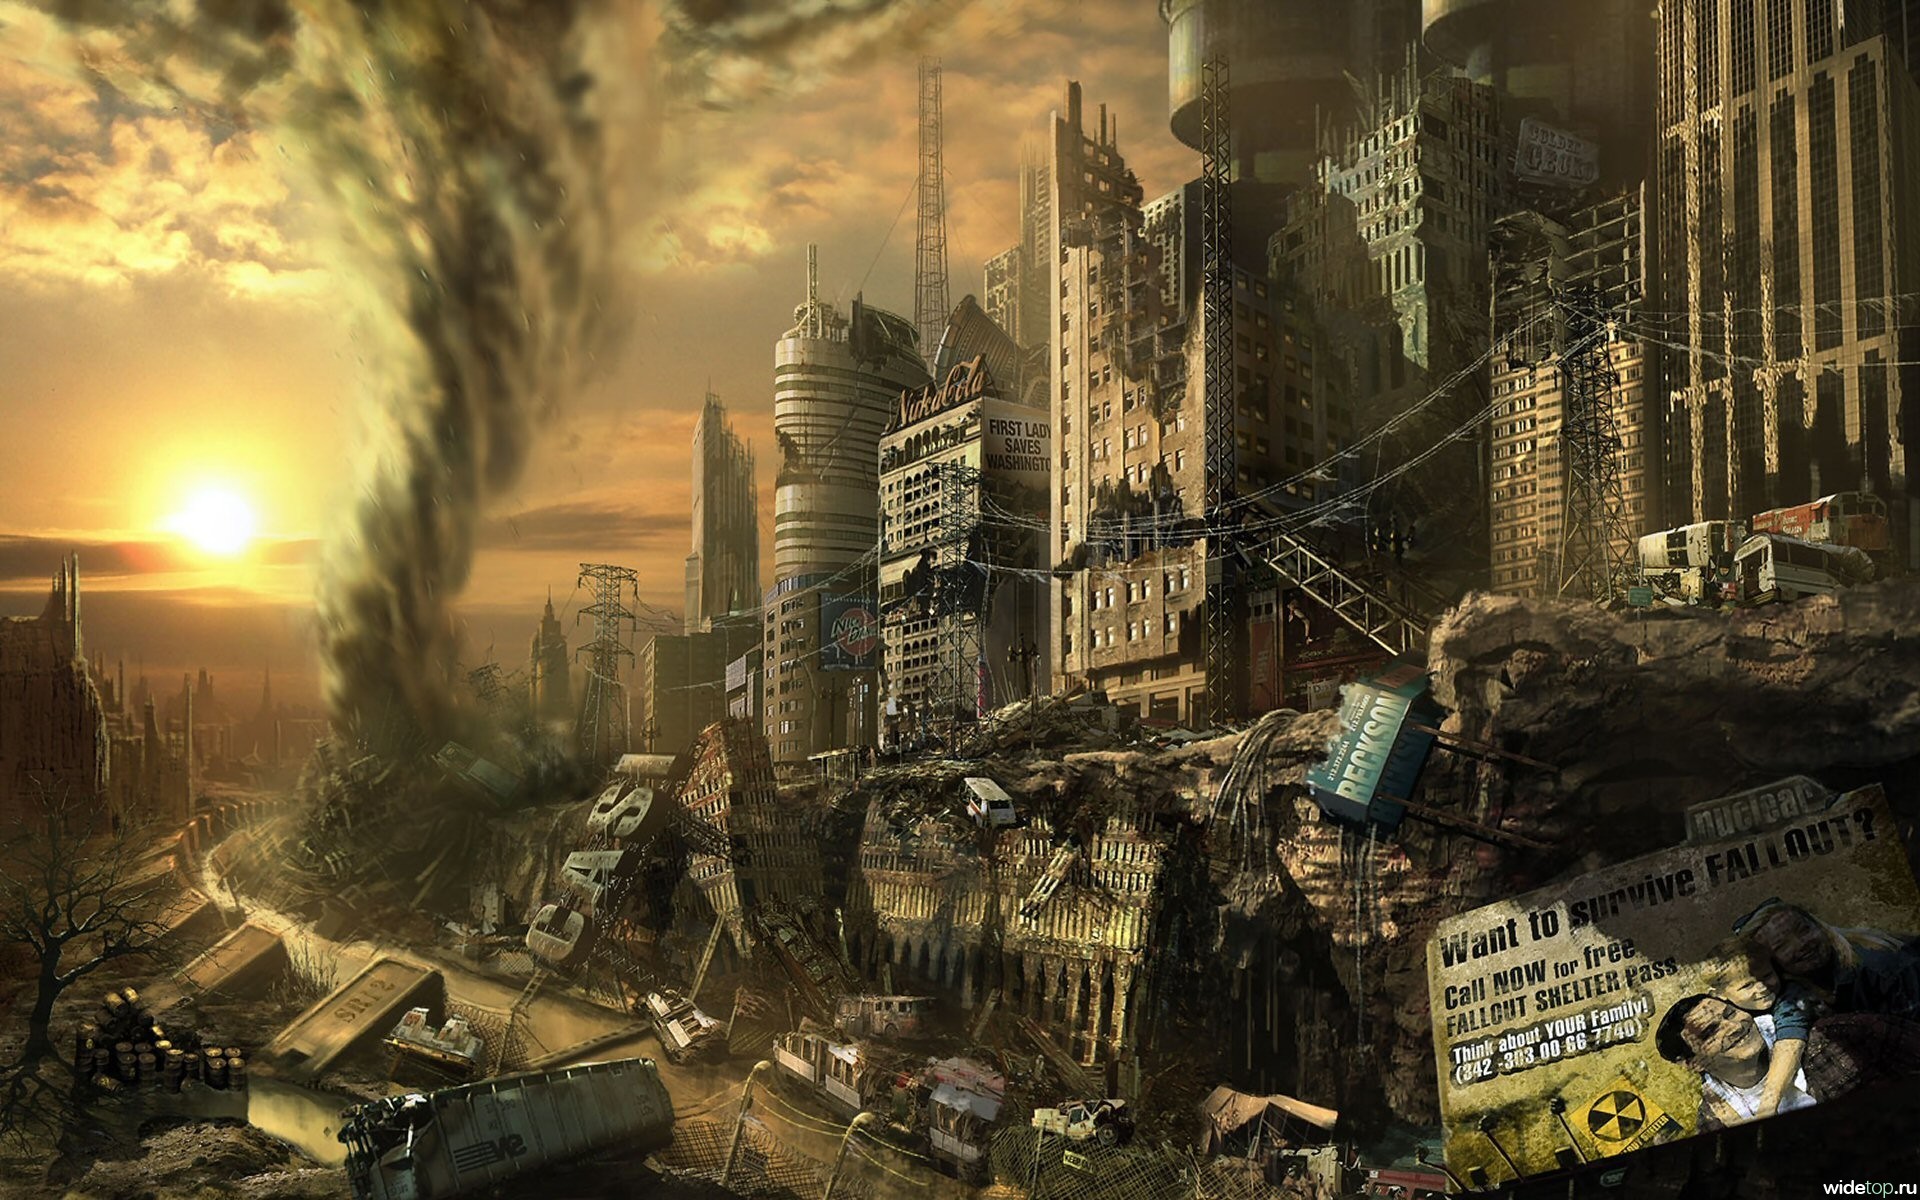 Popular Fallout background images